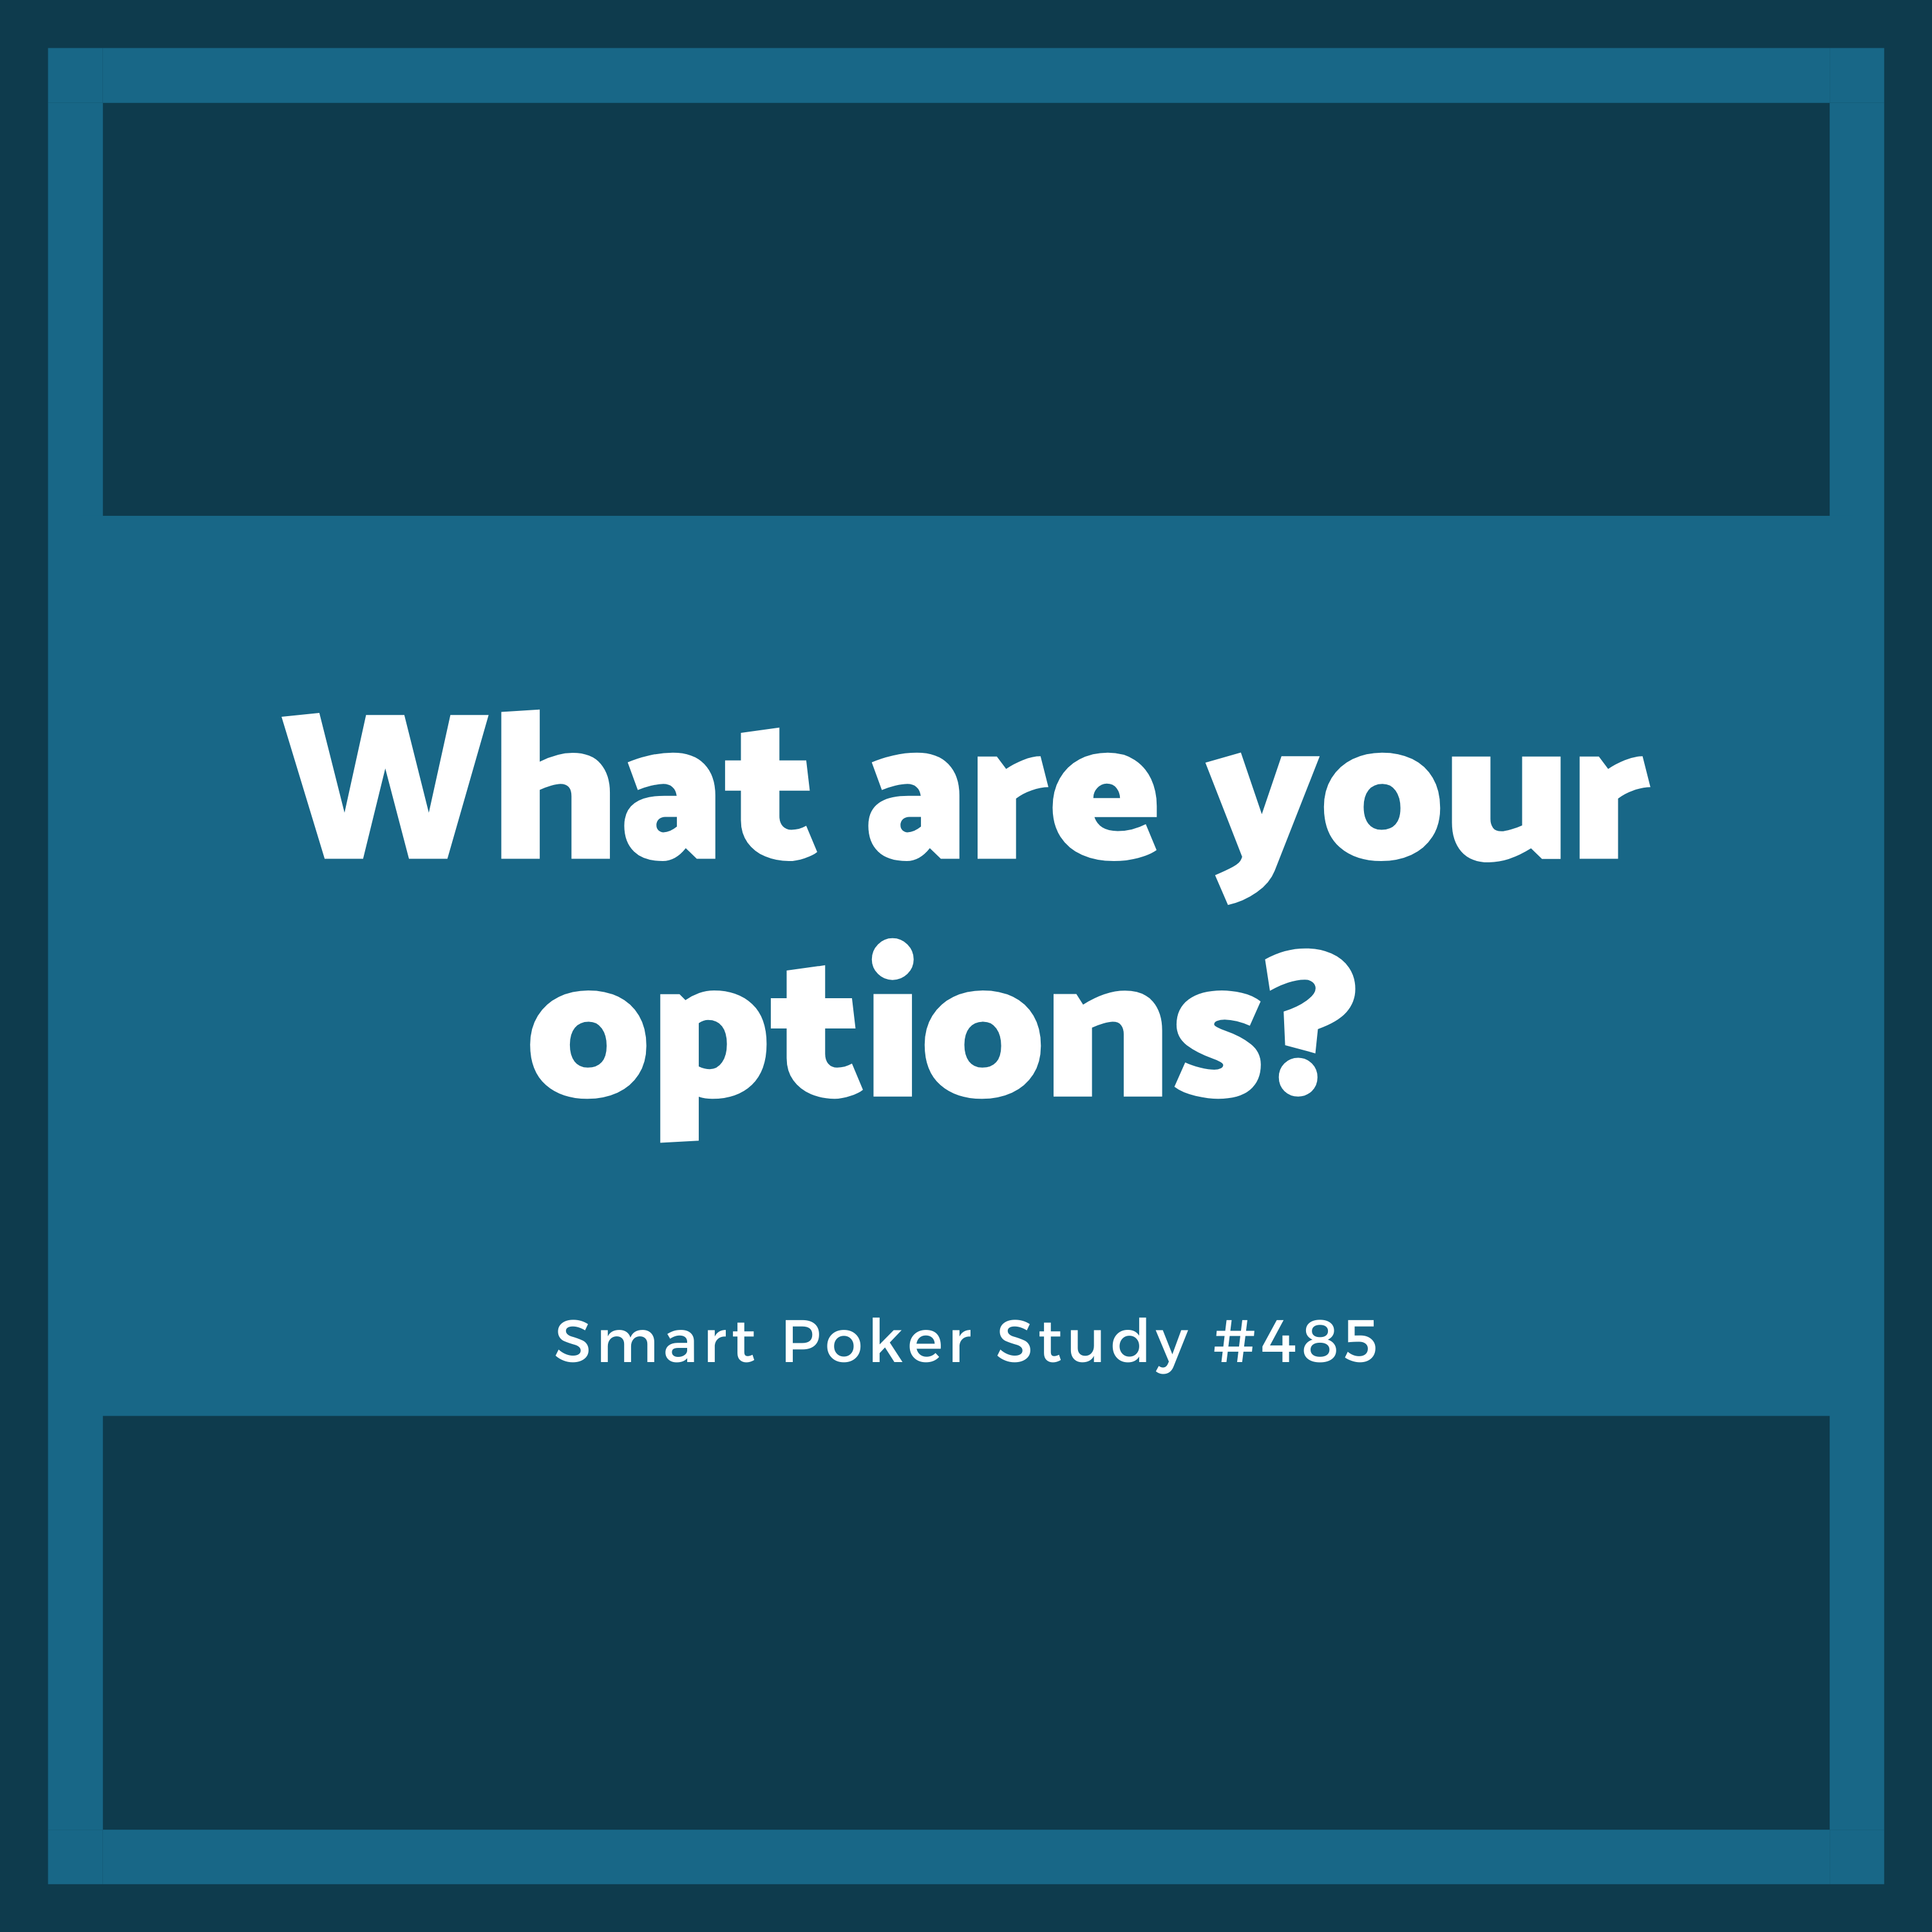 What are your options? #485